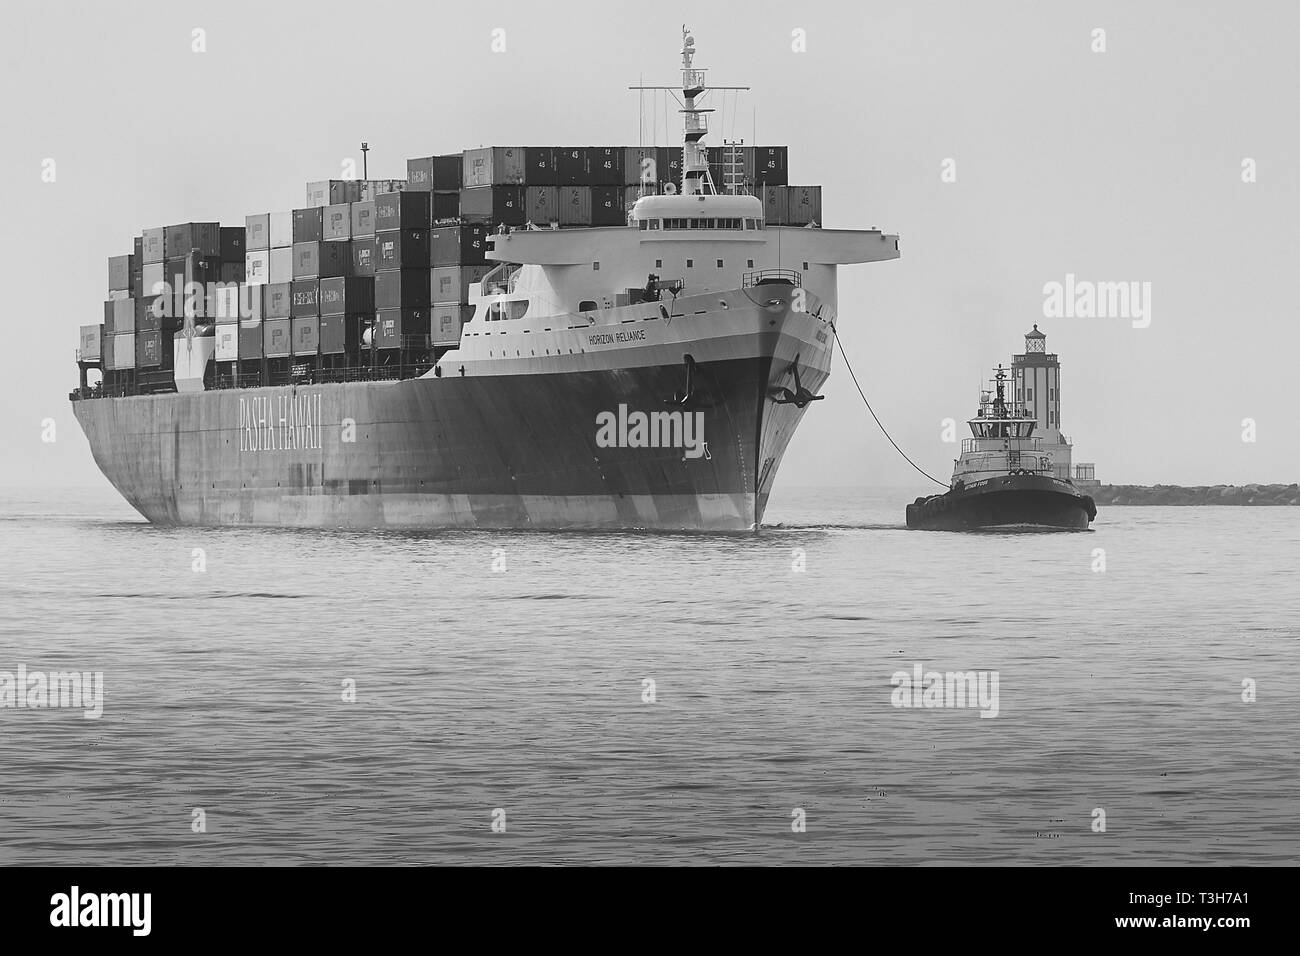 Black And White Photo Of The PASHA HAWAII Container Ship, HORIZON RELIANCE, Entering The Los Angeles Main Channel At The Angels Gate Lighthouse, USA Stock Photo